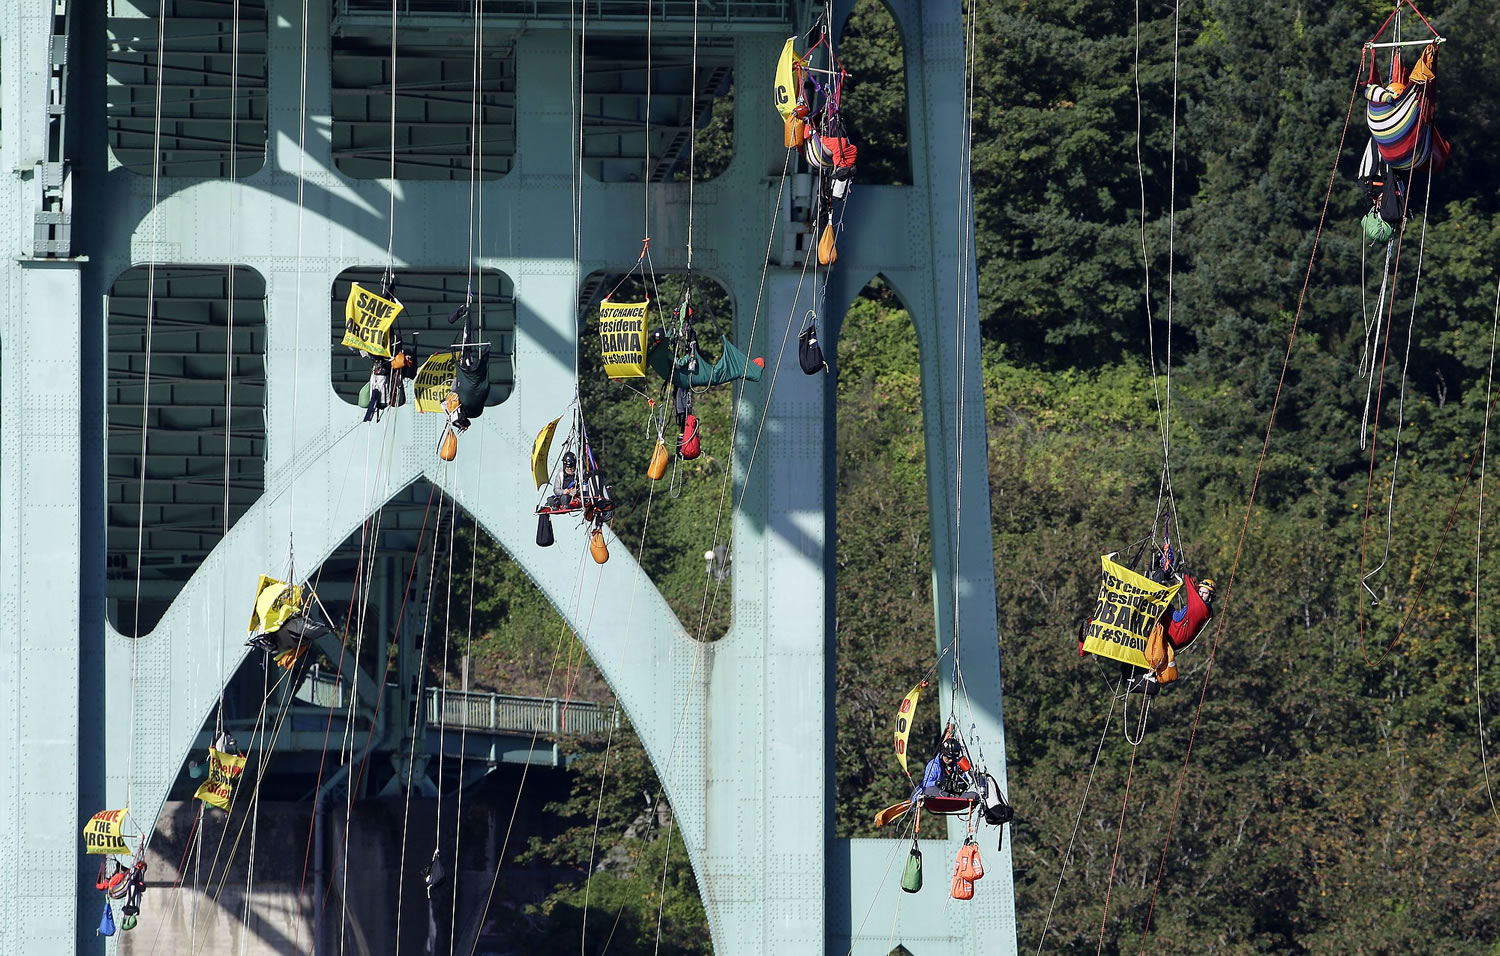 Activists hang from the St. Johns Bridge, Wednesday, July 29, 2015, in Portland, Ore., to protest the departure of Royal Dutch Shell PLC icebreaker Fennica, which is in Portland for repairs. The icebreaker is a vital part of Shell's exploration and spill-response plan off Alaska's northwest coast. Greenpeace officials say the activists have enough water and food to last for days, and can hoist themselves to allow other marine traffic to pass.